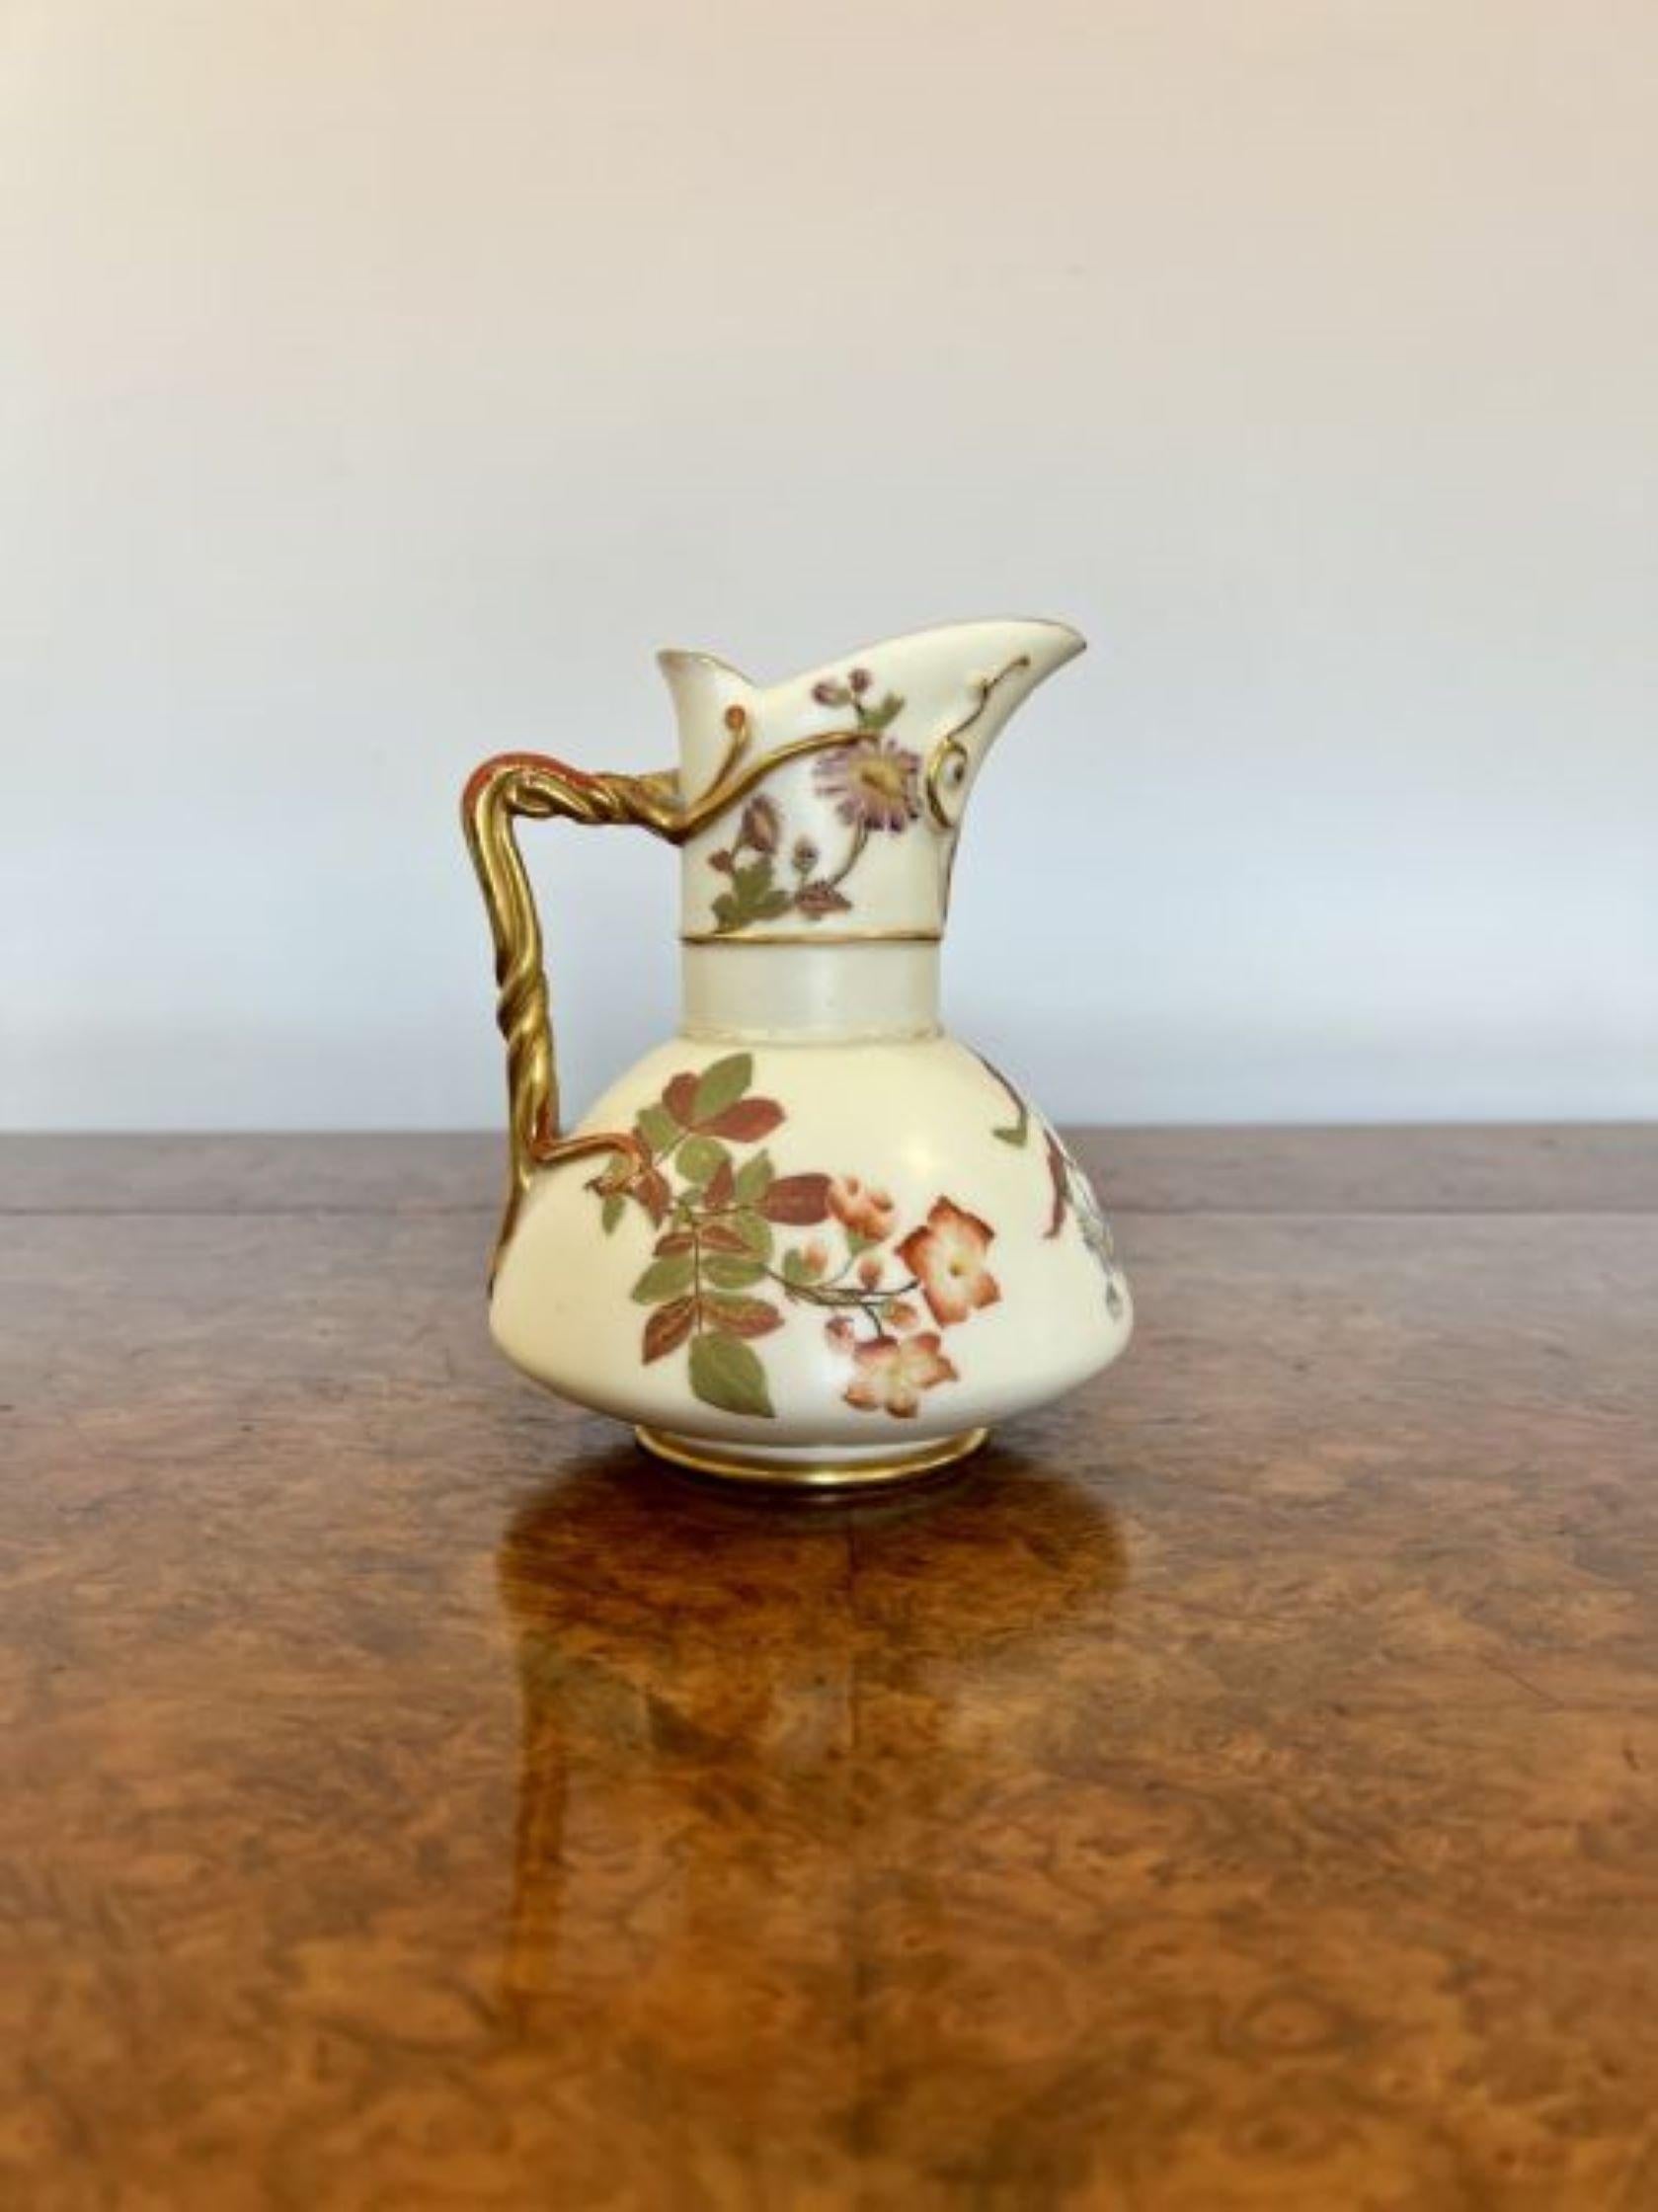 Fantastic quality antique Victorian Royal Worcester cleft jug having a fine quality antique Royal Worcester cleft jug with a lovely shaped body, fantastic hand painted decoration with flowers and leaves in green, gold, purple and red colours